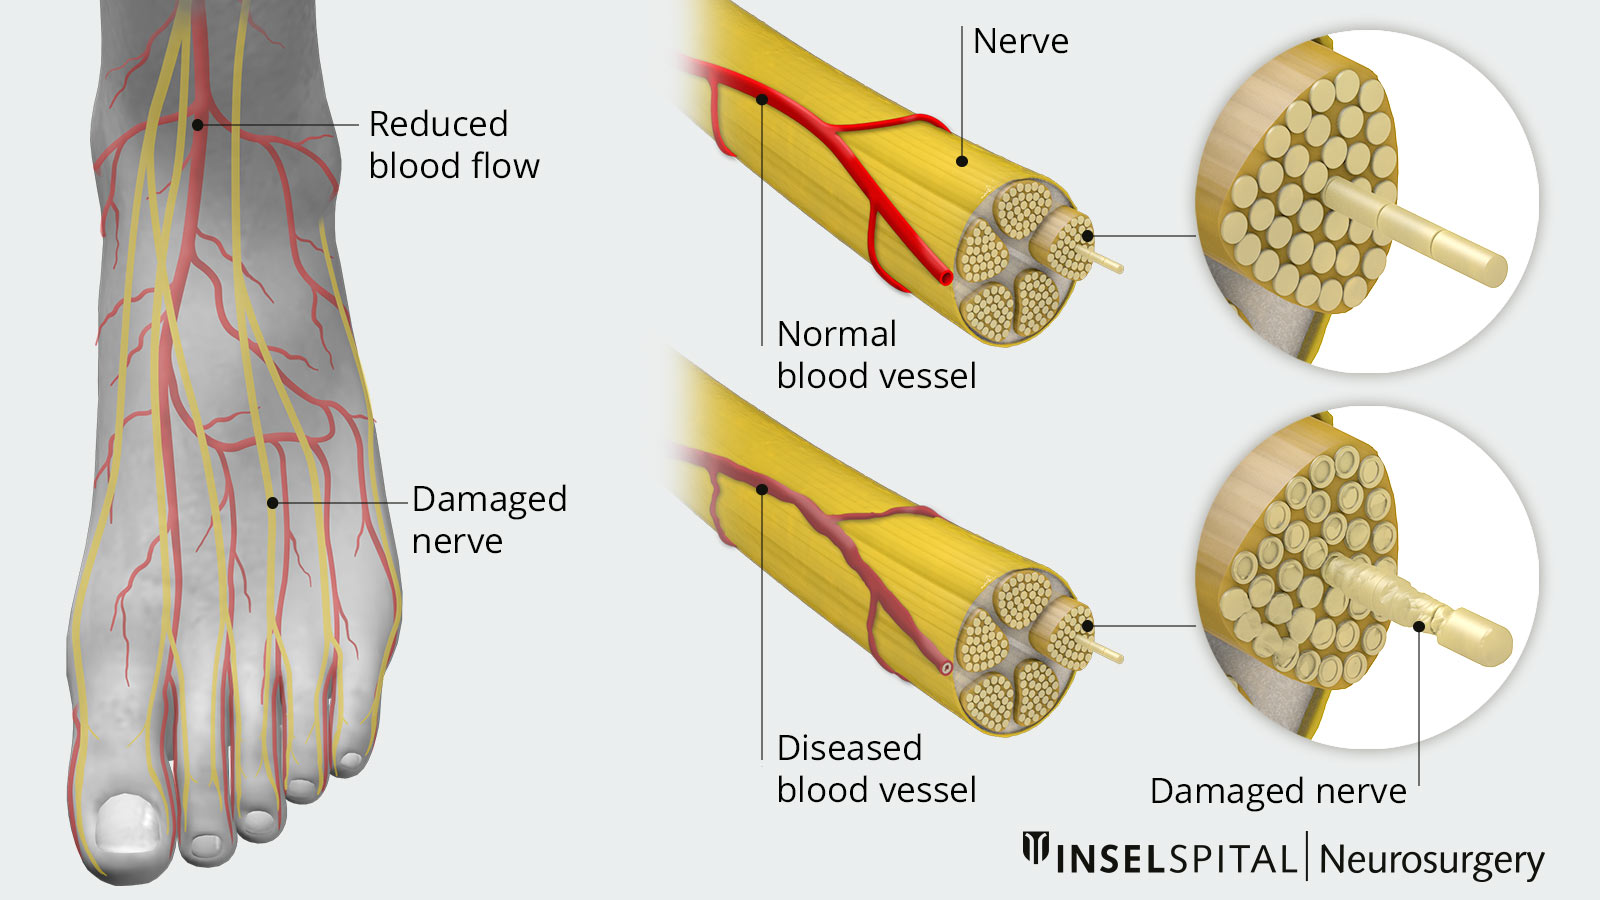  The drawing shows a foot with reduced blood flow and damaged nerves on the left, and the difference between healthy and damaged nerf on the right.